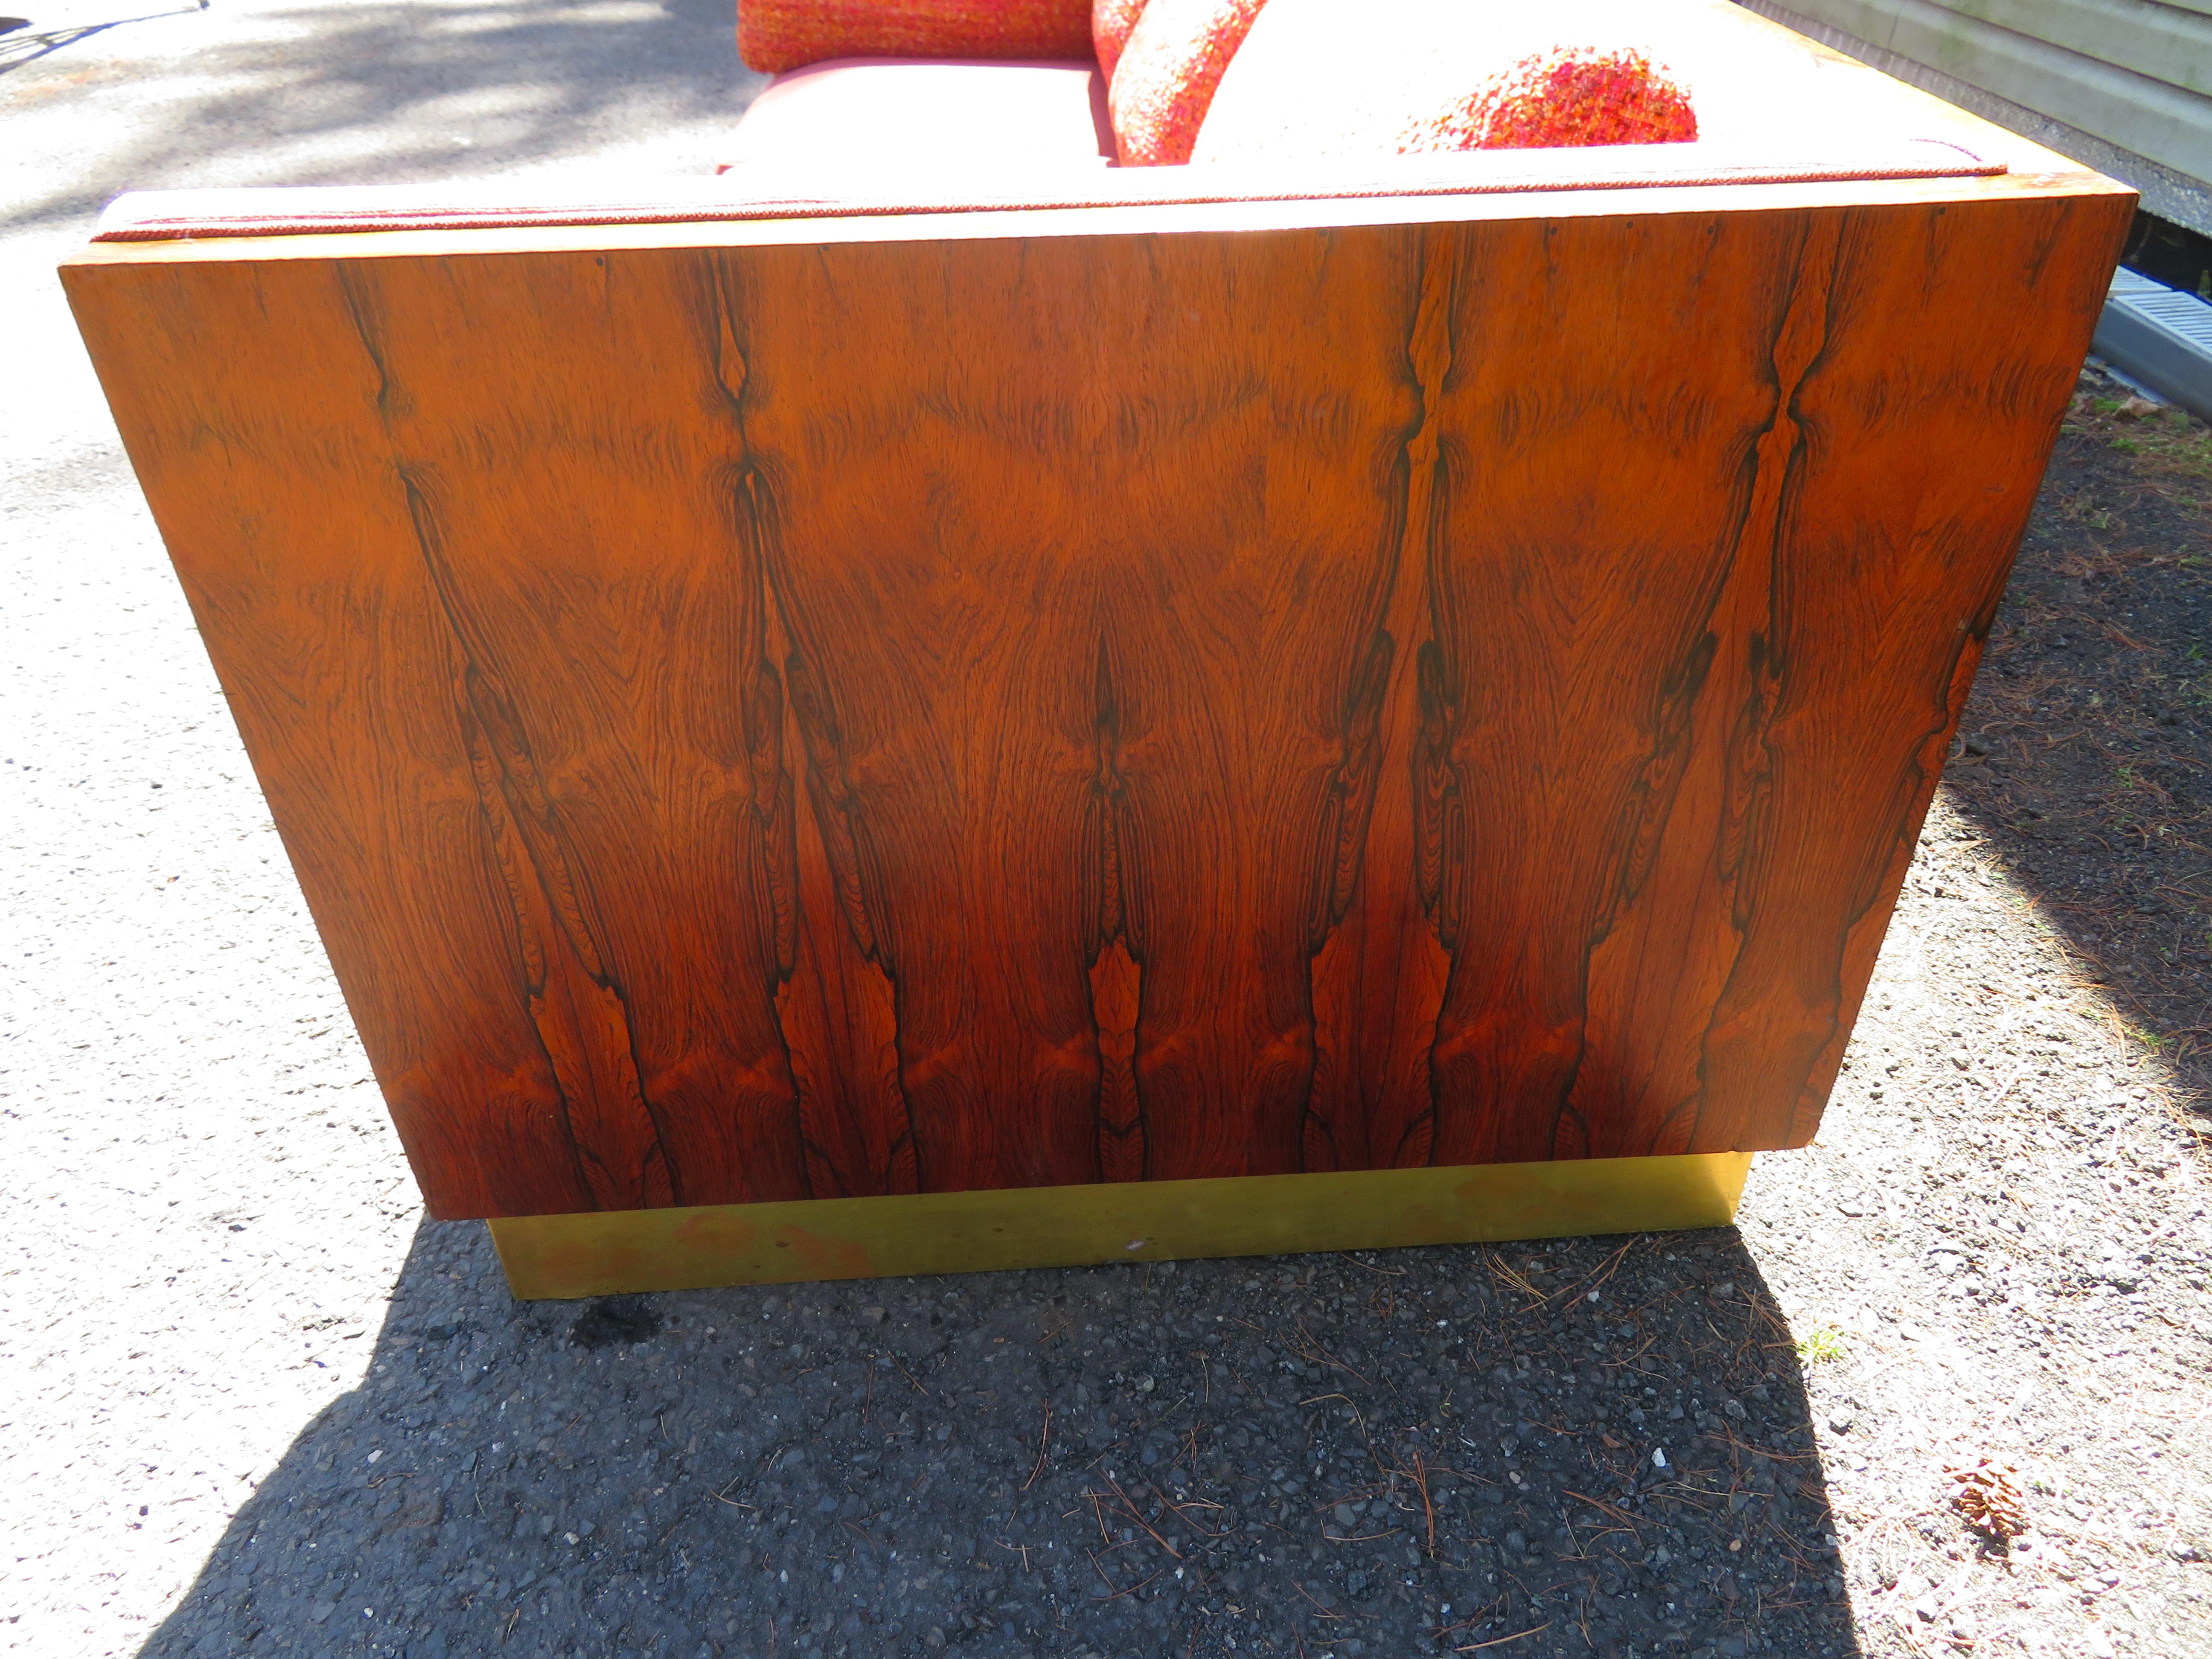 Magnificent Milo Baughman Rosewood Case Sofa Brass Base Mid-Century Modern In Good Condition For Sale In Pemberton, NJ